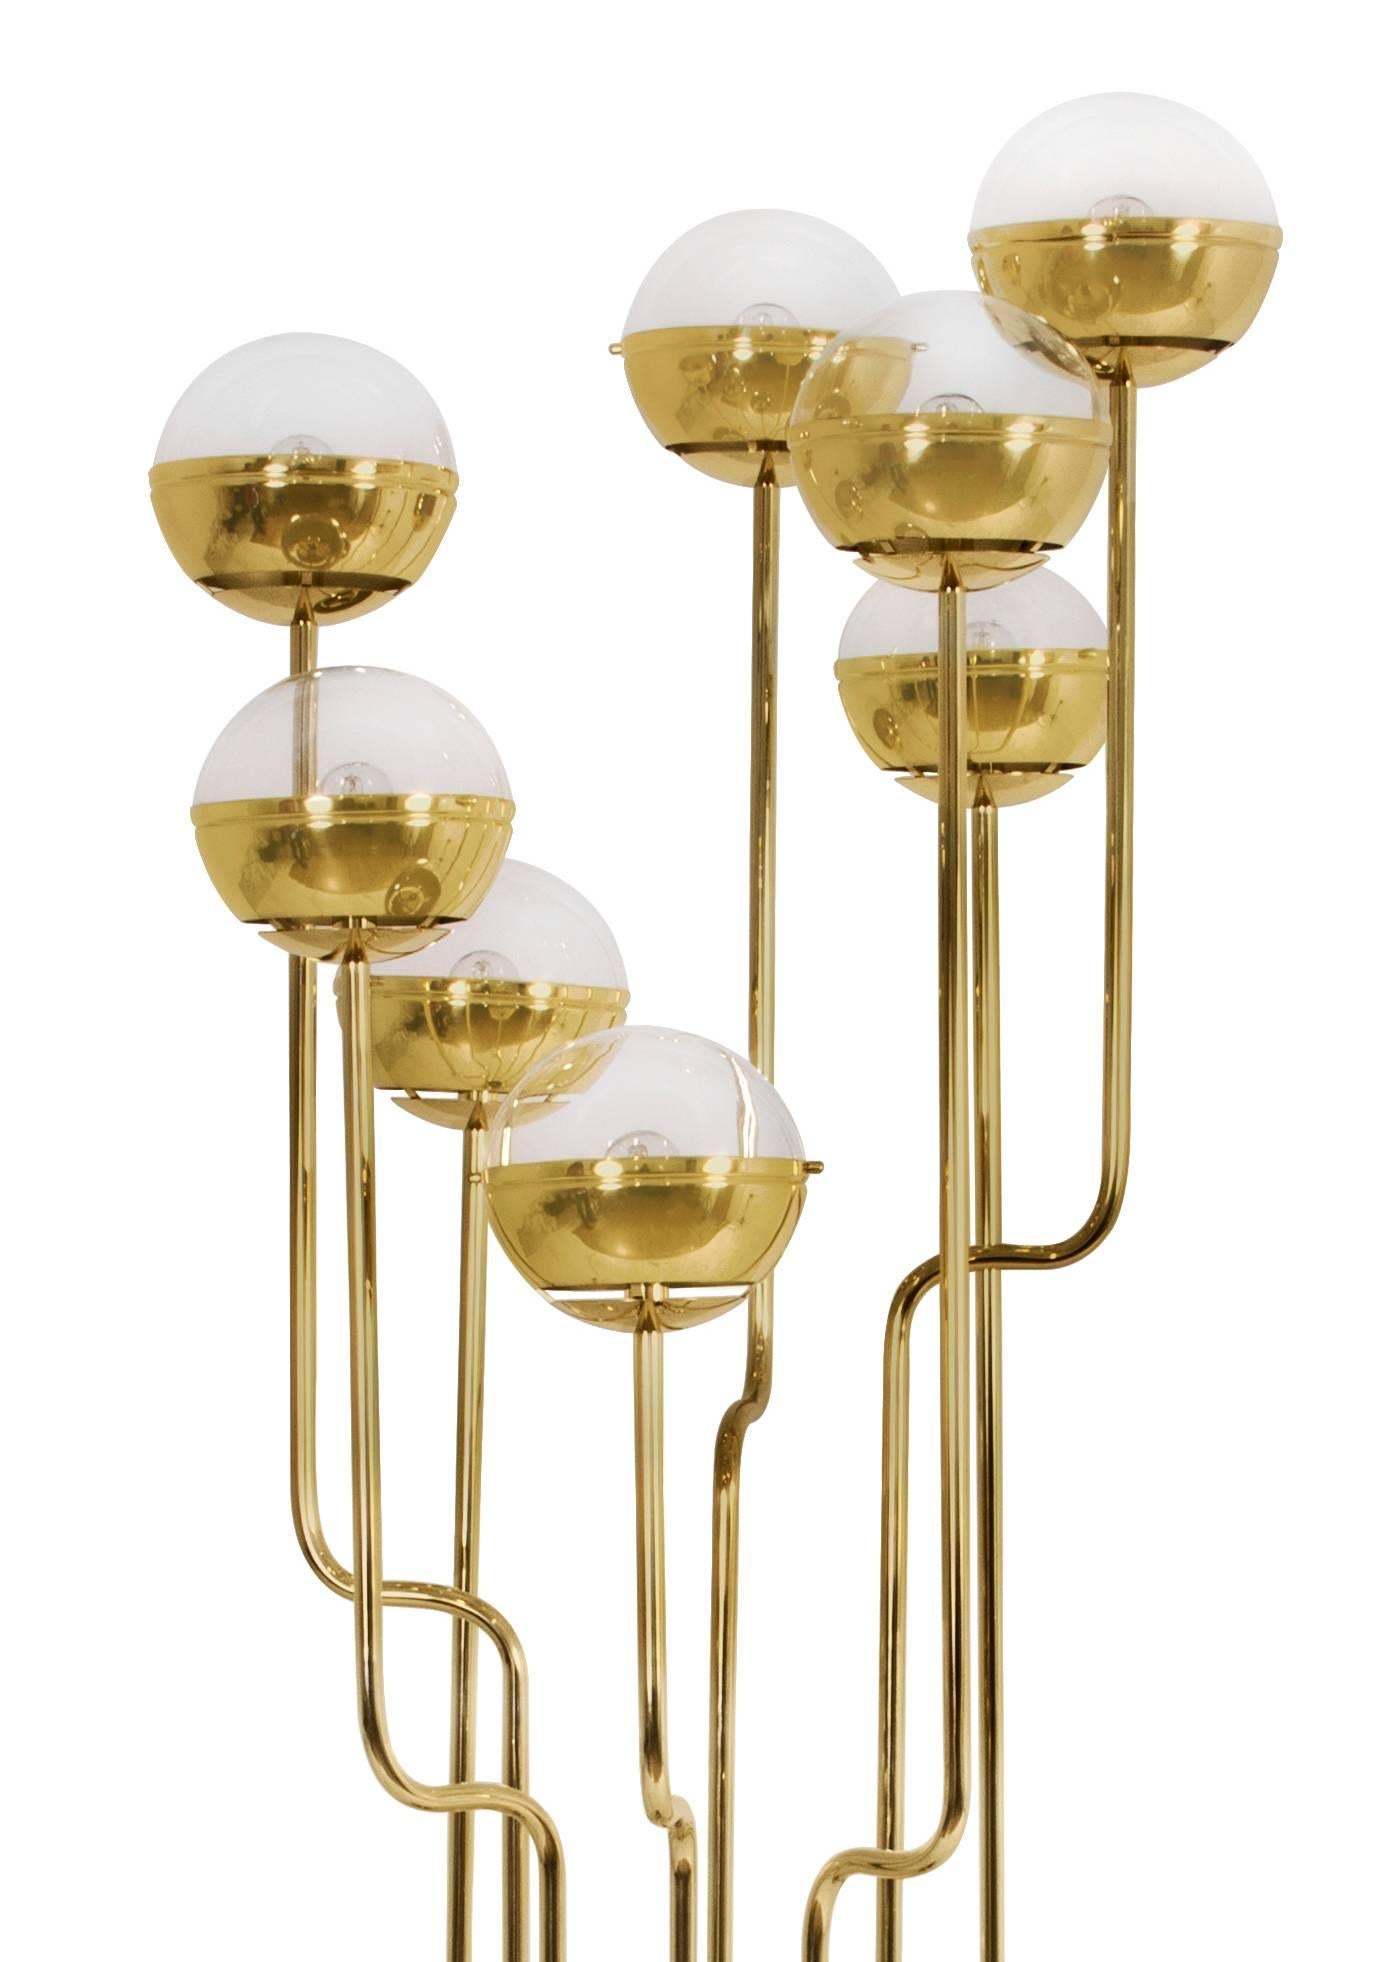 Gold plated brass structure and gold plated brass shaders, with eight glass light globes and black marble base.

TECHNICAL SPECIFICATIONS:
BULB HOLDERS 8 x E14 (EU/UK), E12(USA) bulb
VOLTAGE 220 V - 240 V
WATTAGE 40 watts
WEIGHT 55 kg  121.3